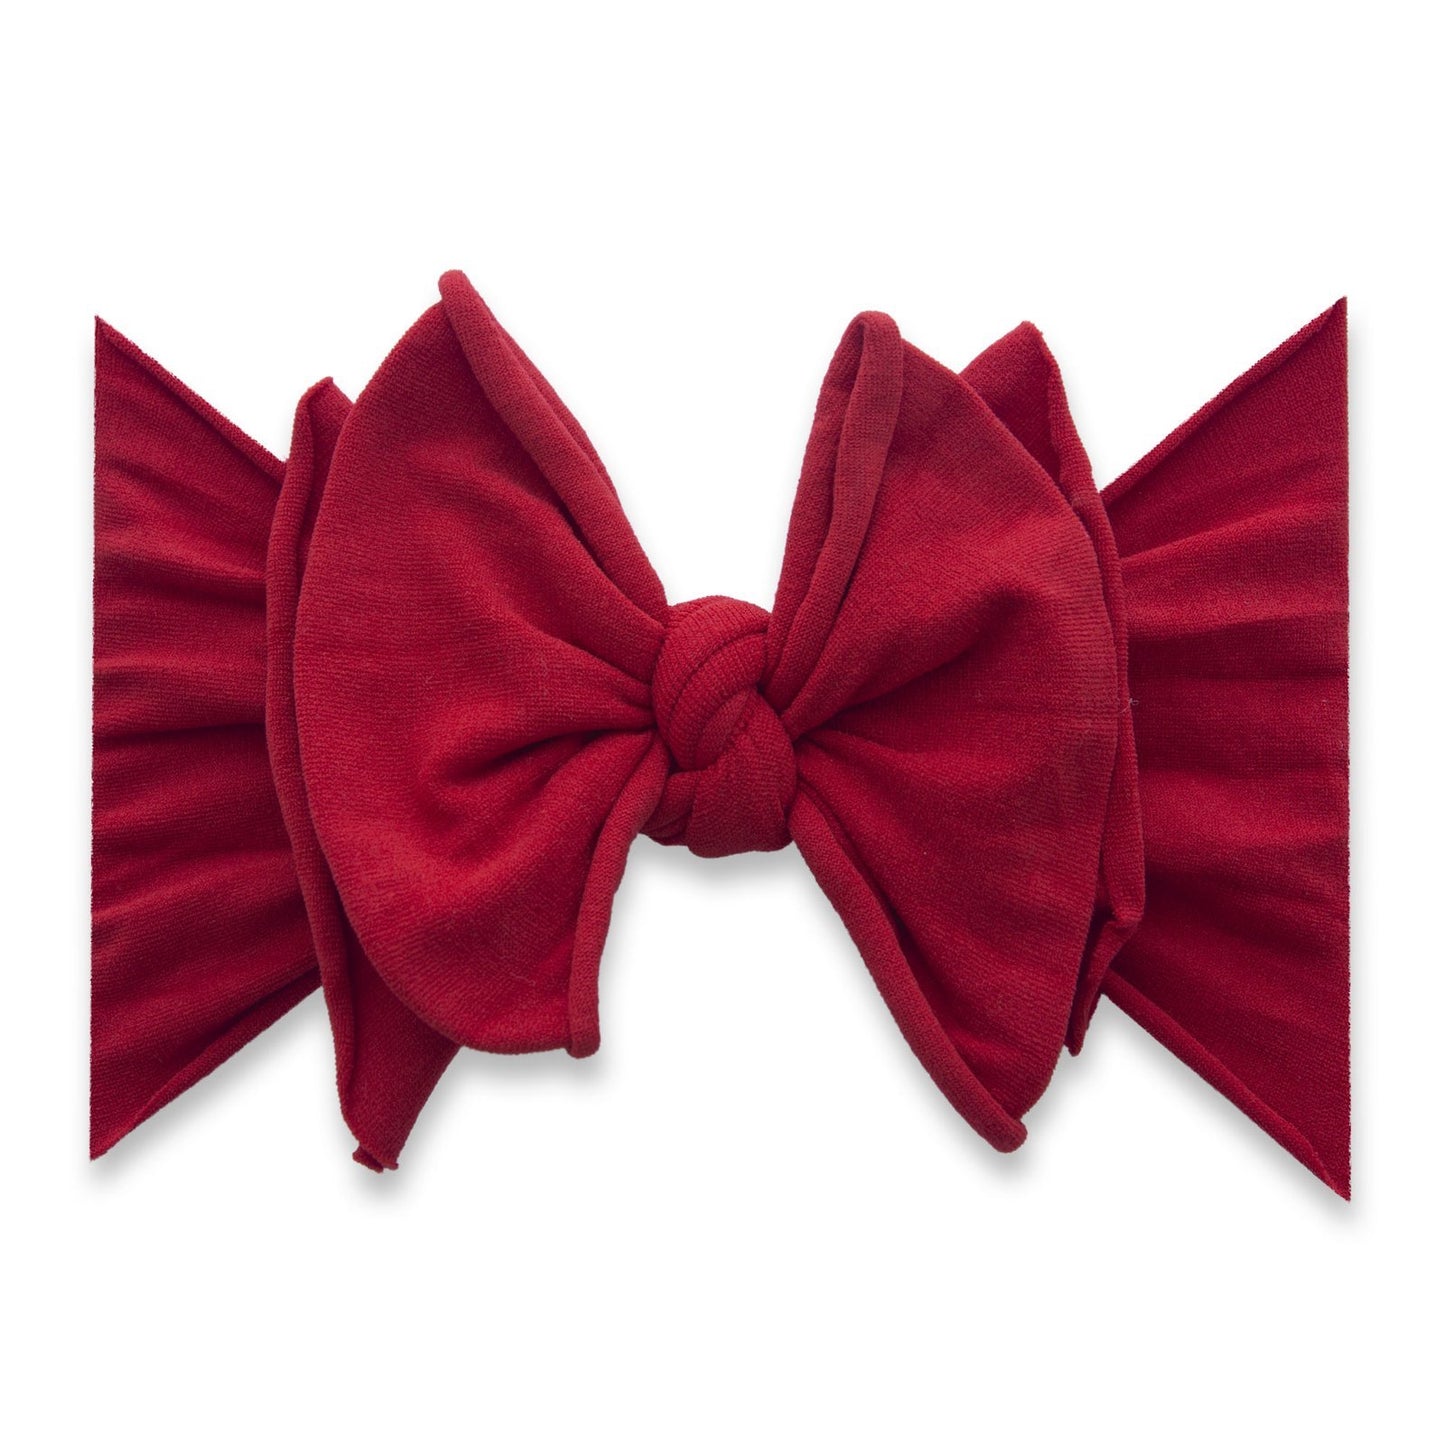 FAB-BOW-LOUS - Red